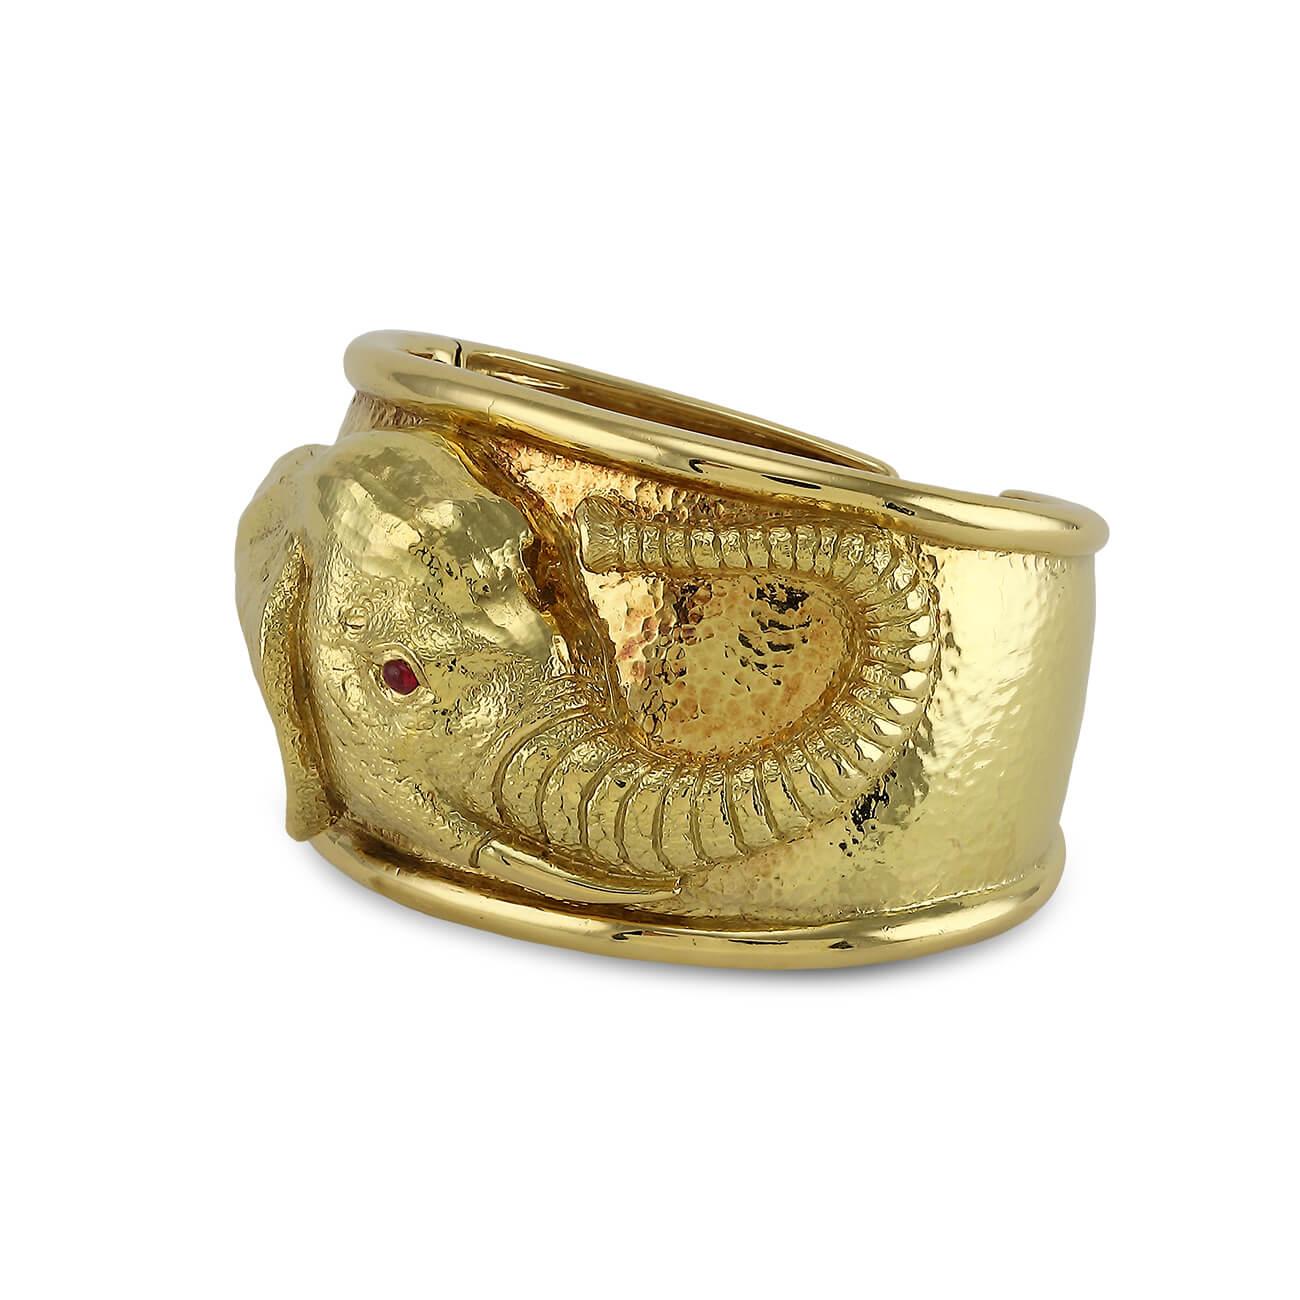 18K Yellow gold elephant cuff by David Webb. The cuff has a repousse elephant head with a ruby eye.

Hammered 18K yellow gold
Cabochon ruby